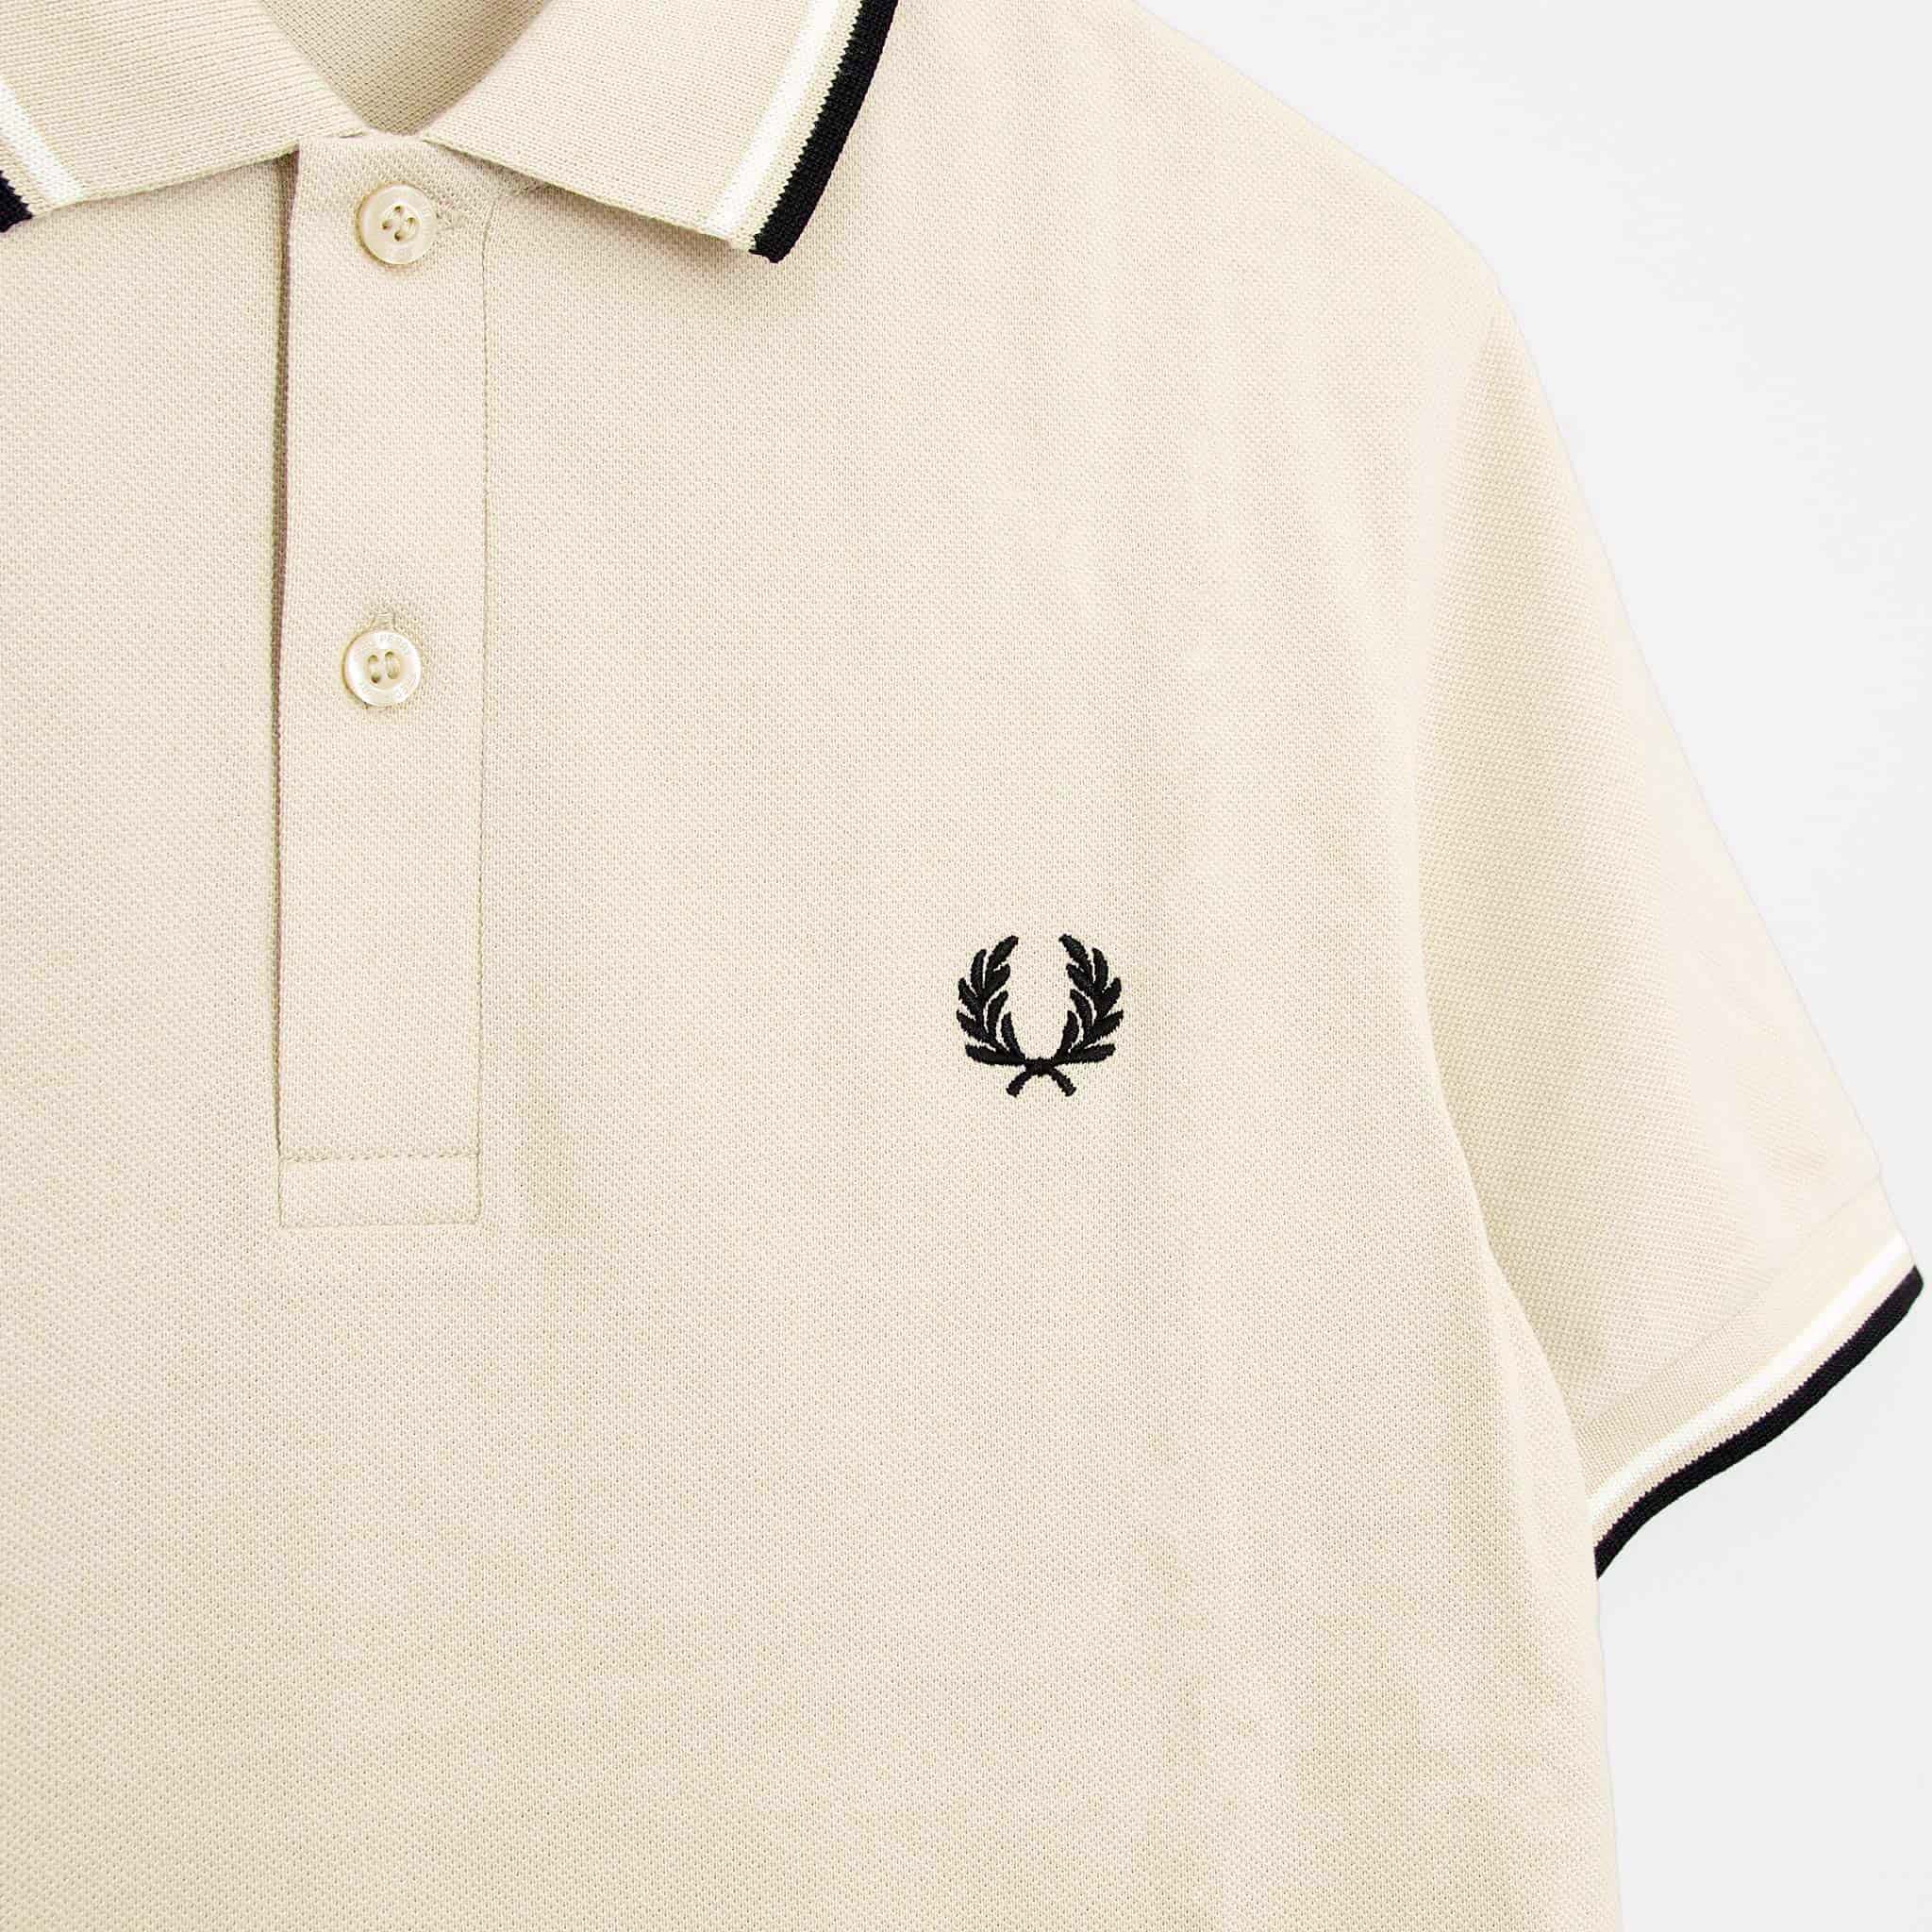 FRED PERRY THE FRED PERRY SHIRT M3600